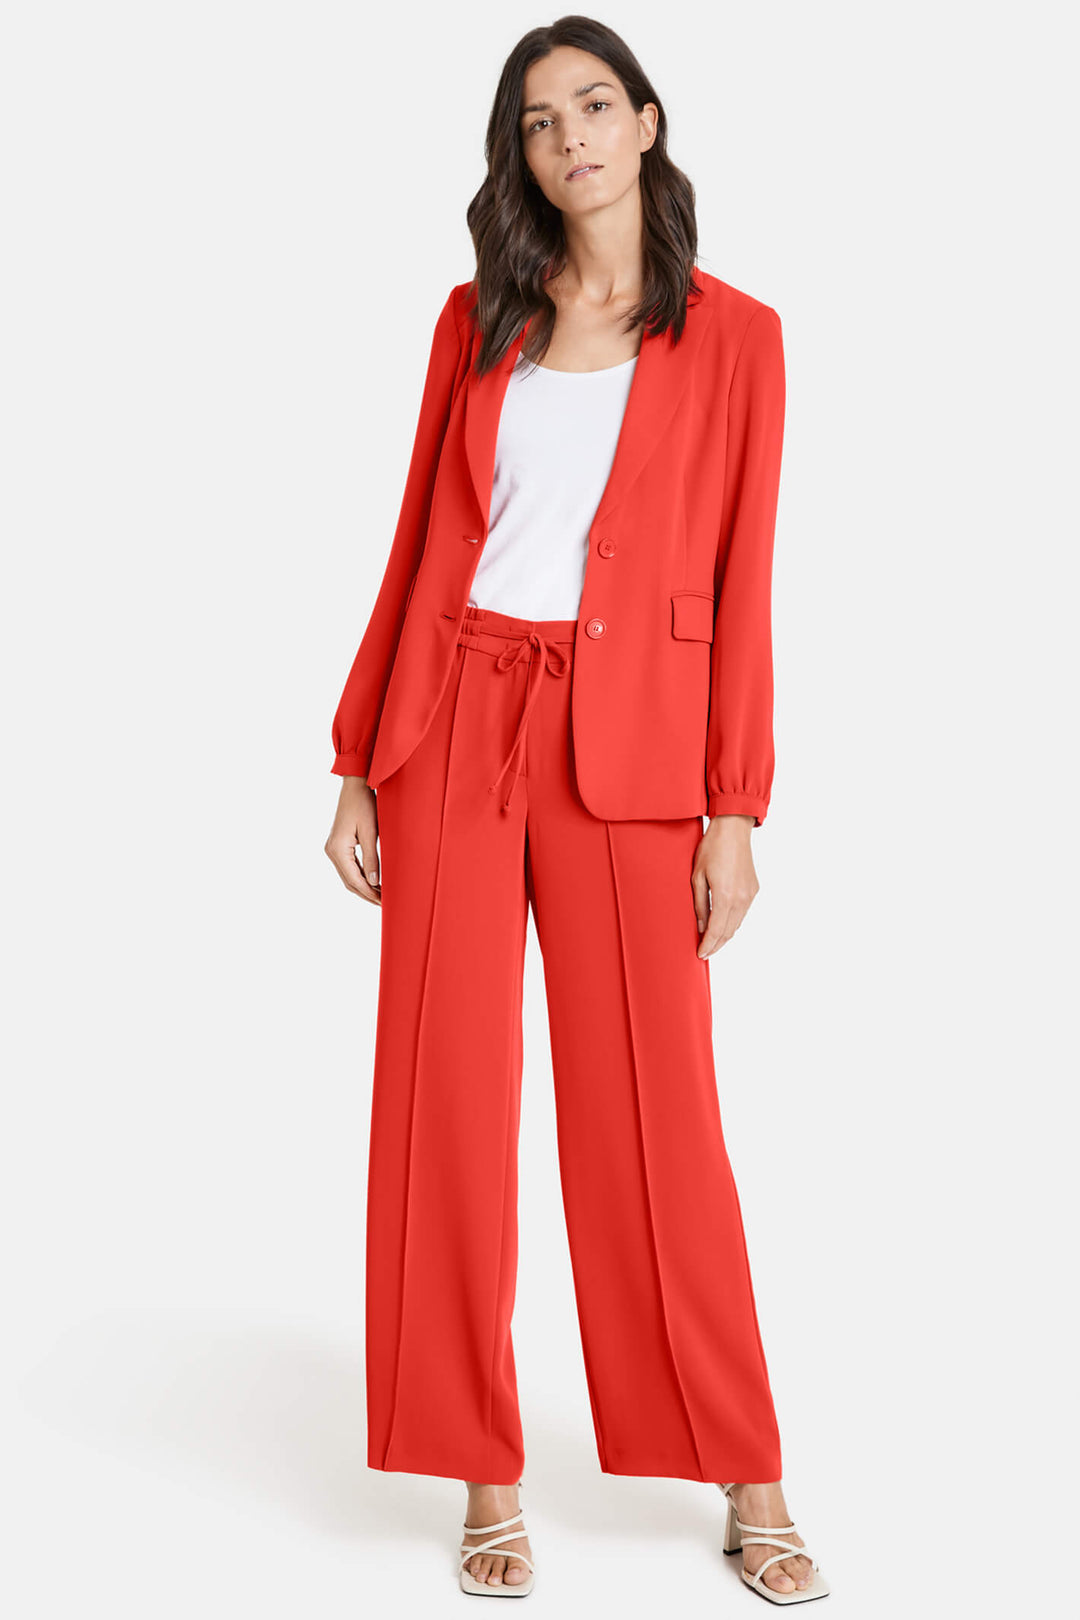 Gerry Weber 120015 Fire Red Trousers - Experience Boutique